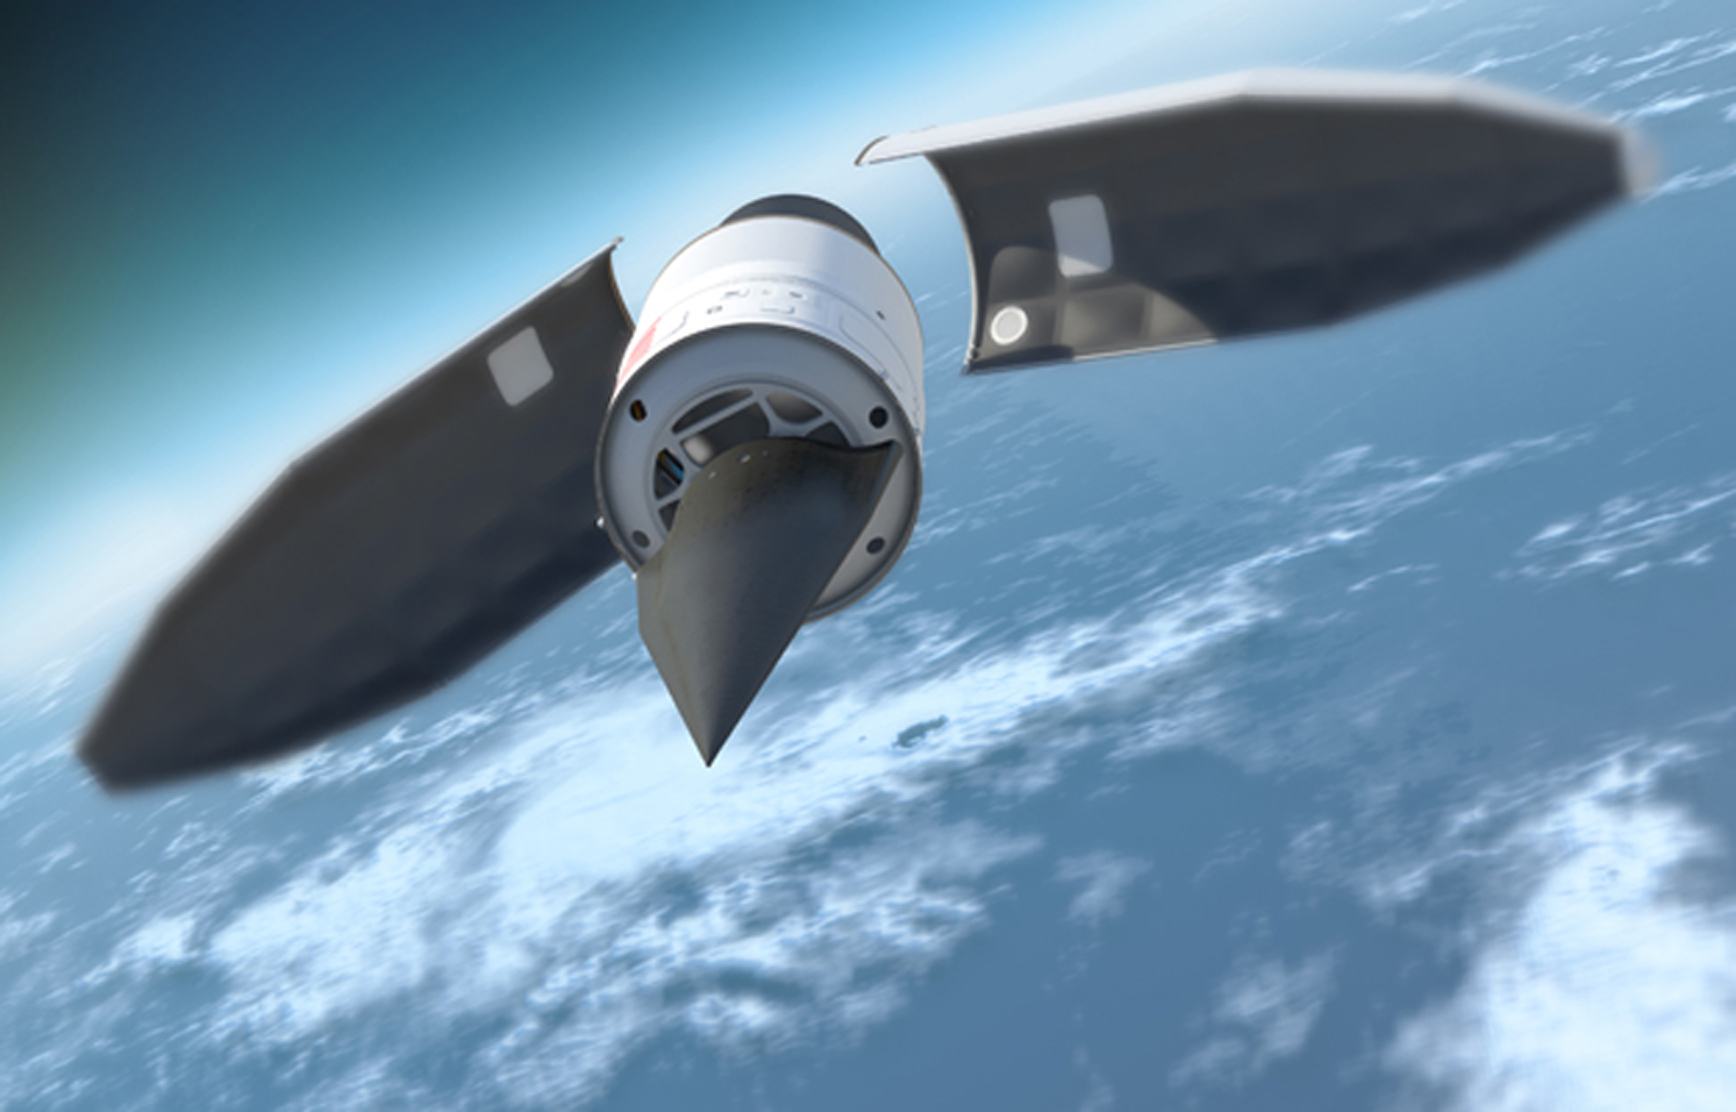 An artist's illustration of DARPA's Hypersonic Technology Vehicle 2 (HTV-2) travelling at 13,000 mph, or Mach 20, during its Aug. 11, 2011 test flight.